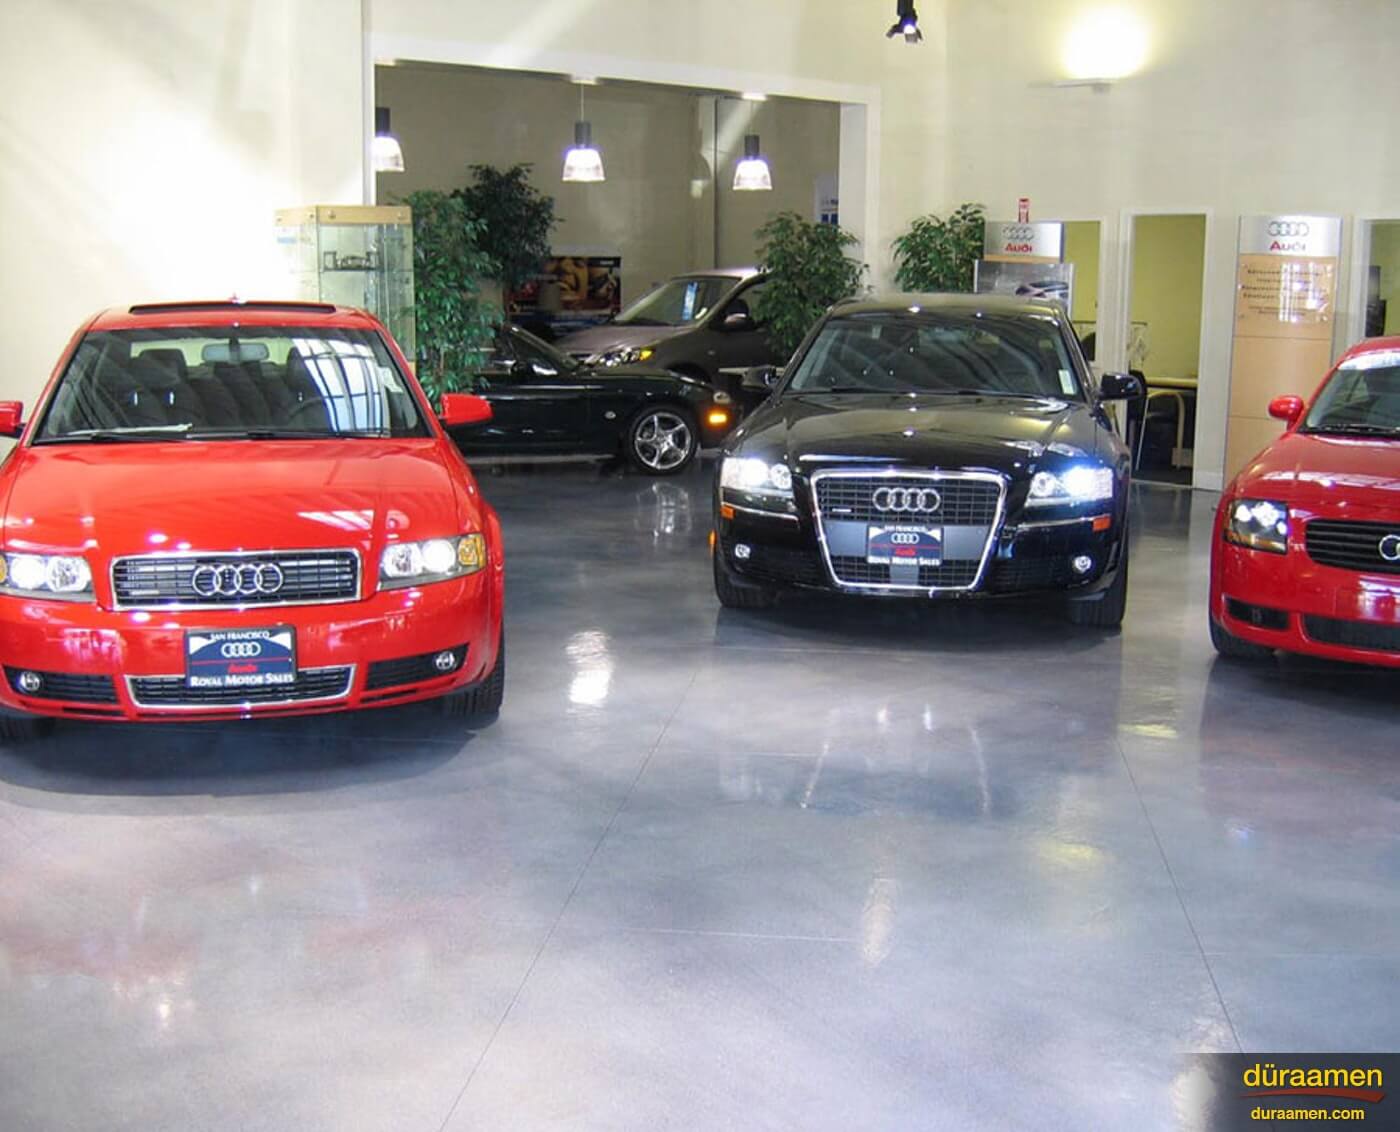 Want to make a car shine Park in on beautiful resinous flooring from DuraamennbspAuto Dealer Showroom | Duraamen Engineered Products Inc